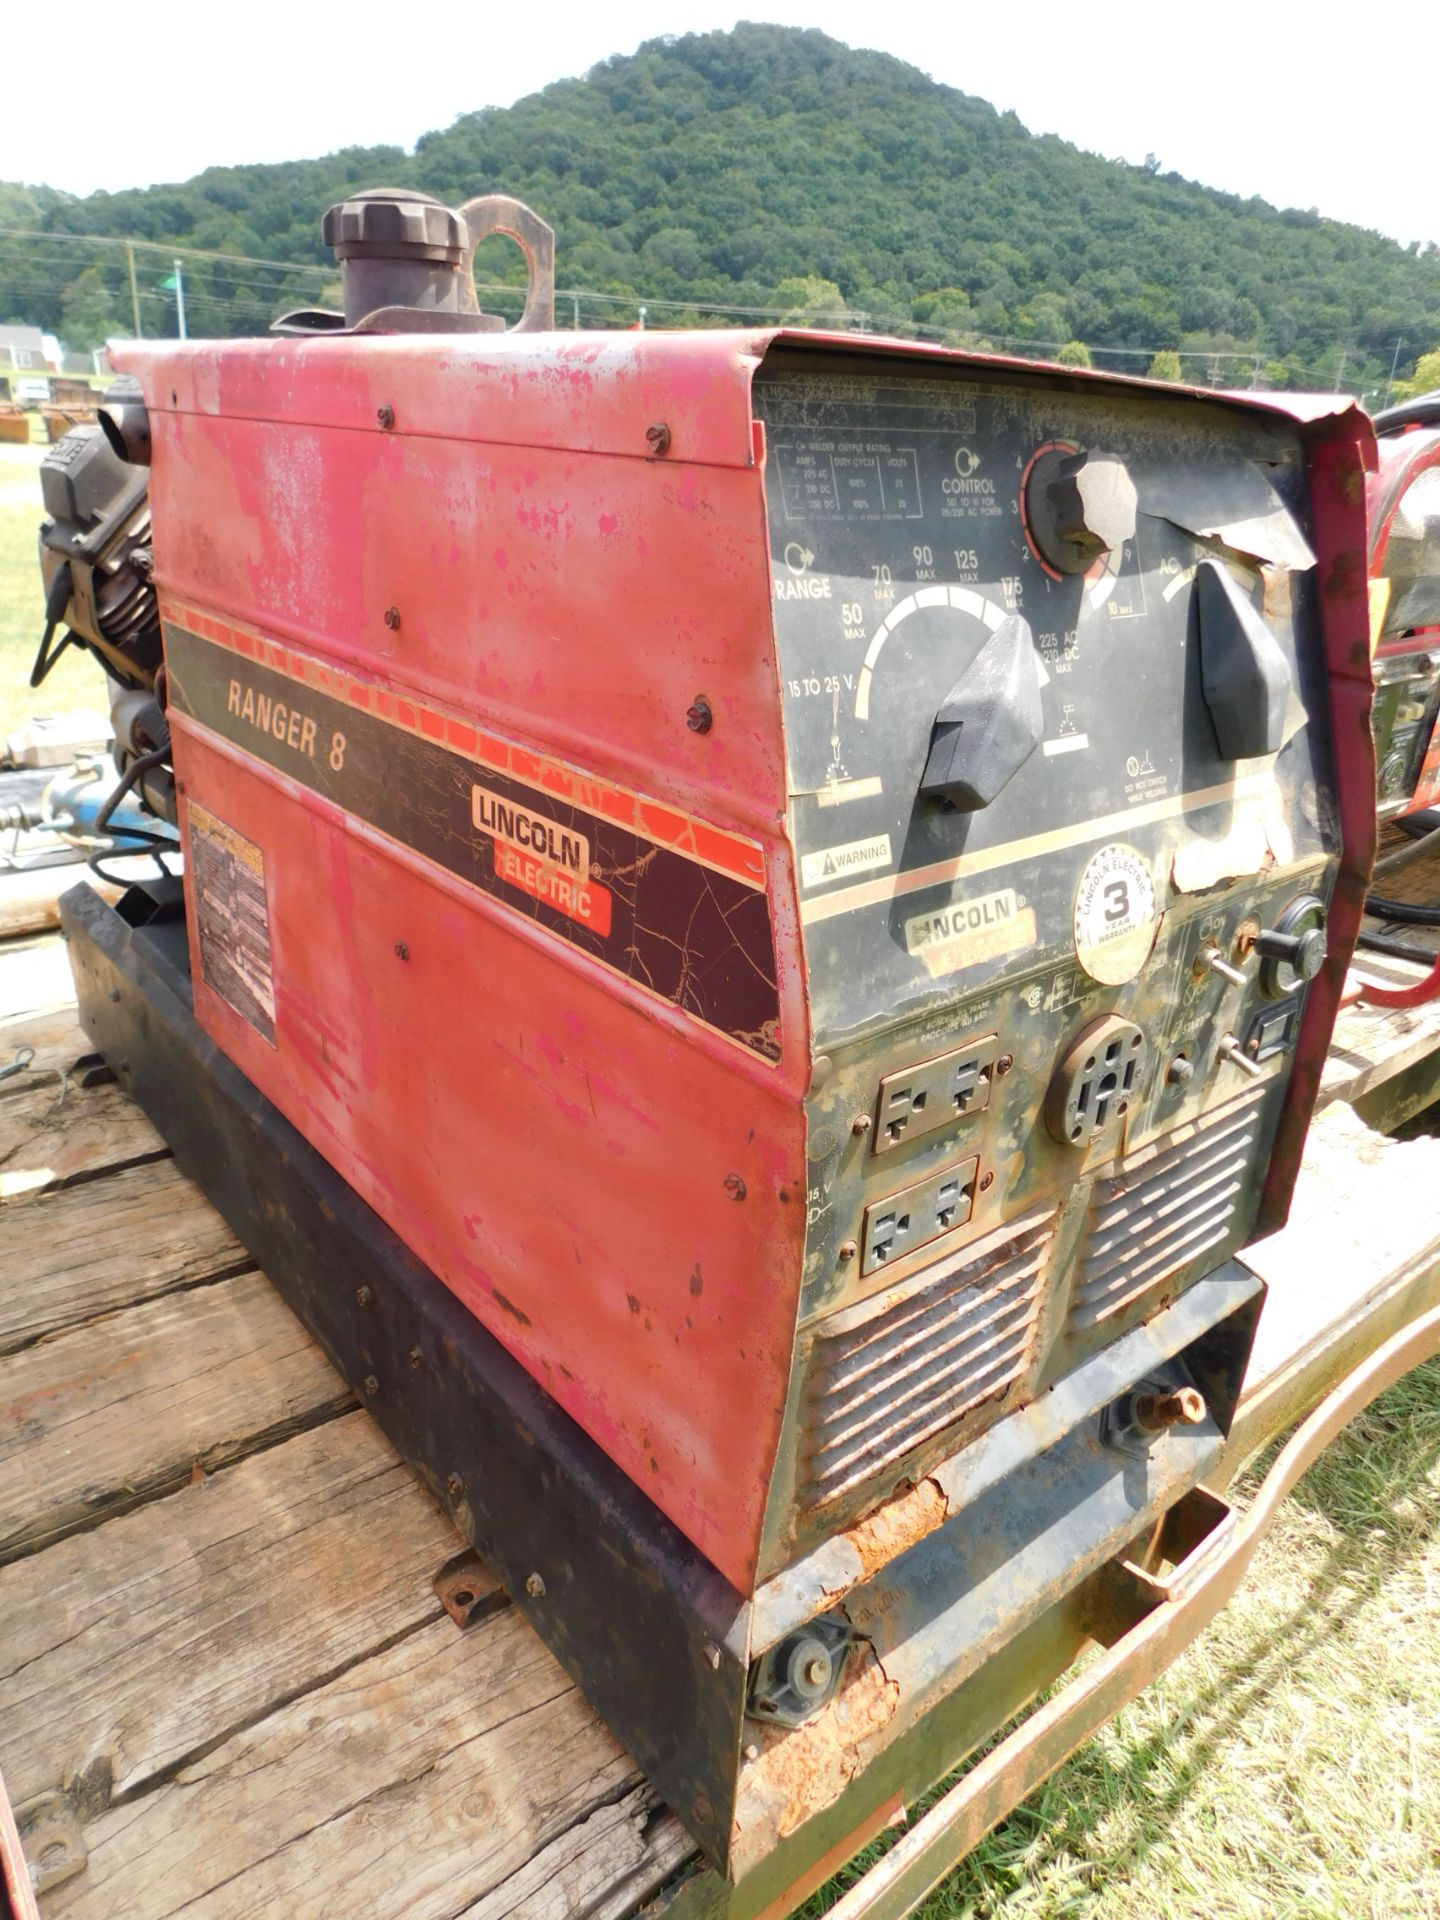 Lincoln Ranger 8 Gas-Powered Welder/Generator, SN NA, 865 hours, Not in Running Condition - Image 3 of 8